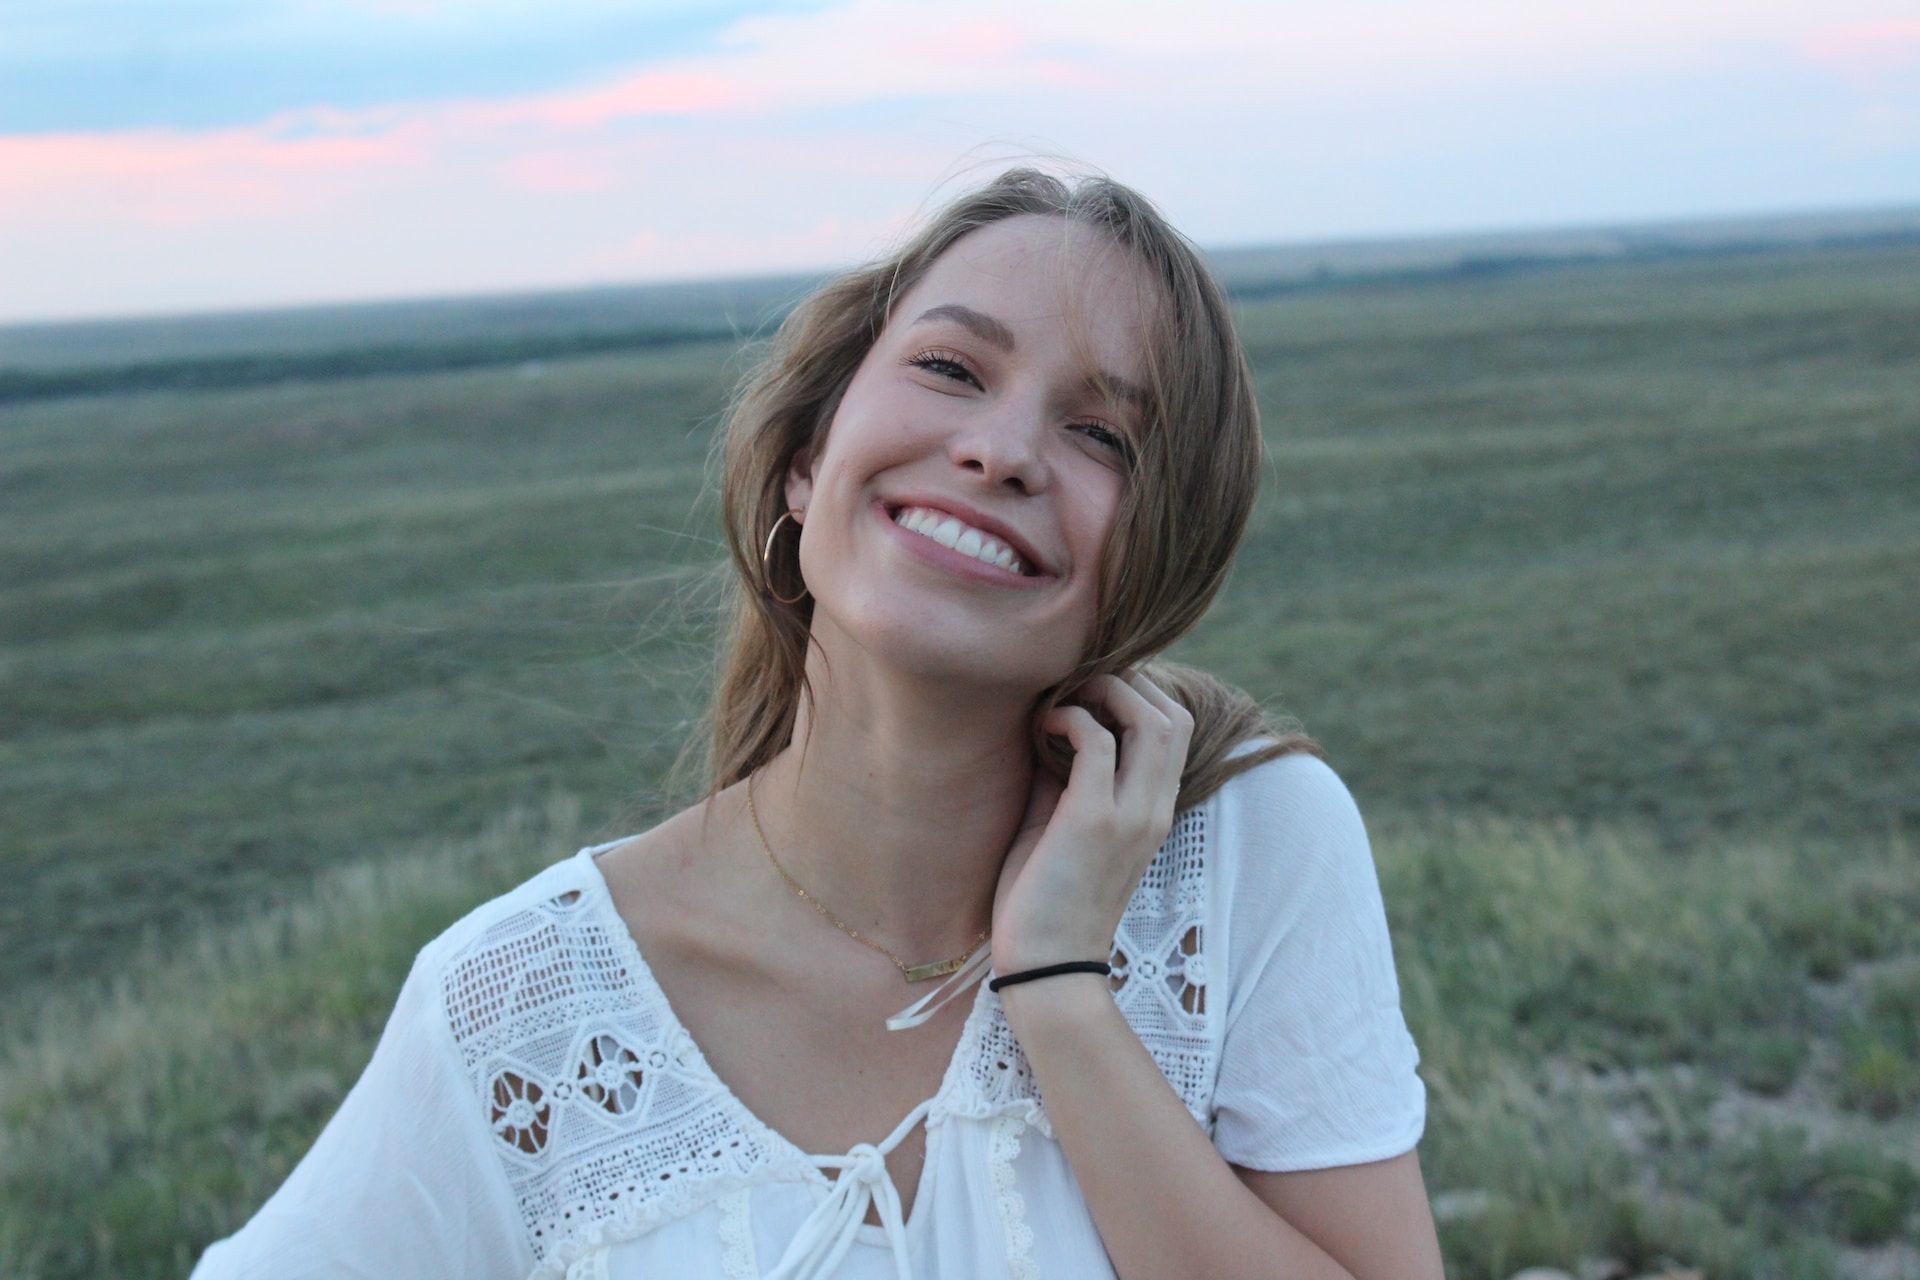 young woman smiling in a field wearing a white dress